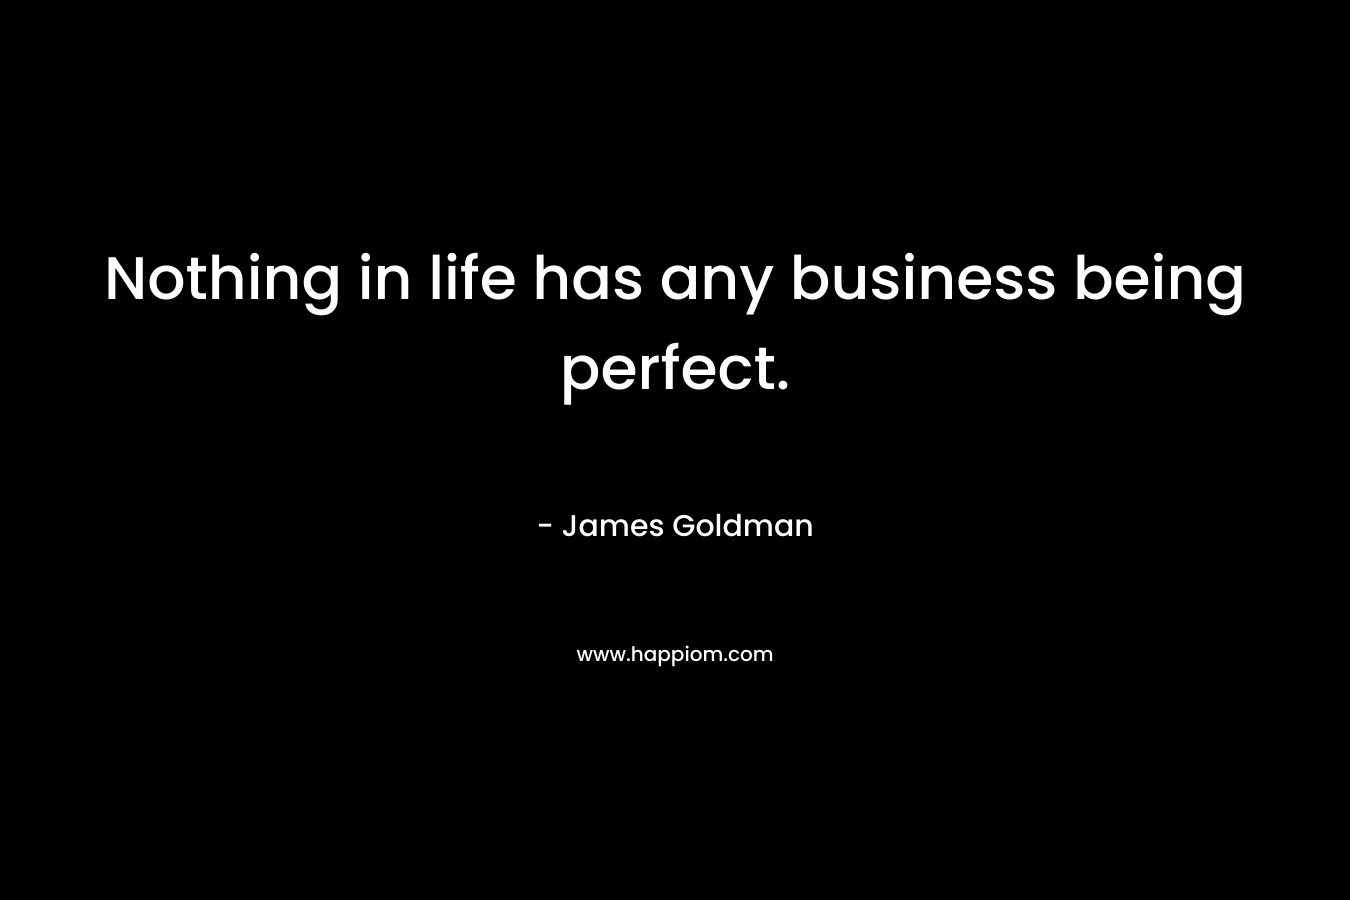 Nothing in life has any business being perfect. – James Goldman